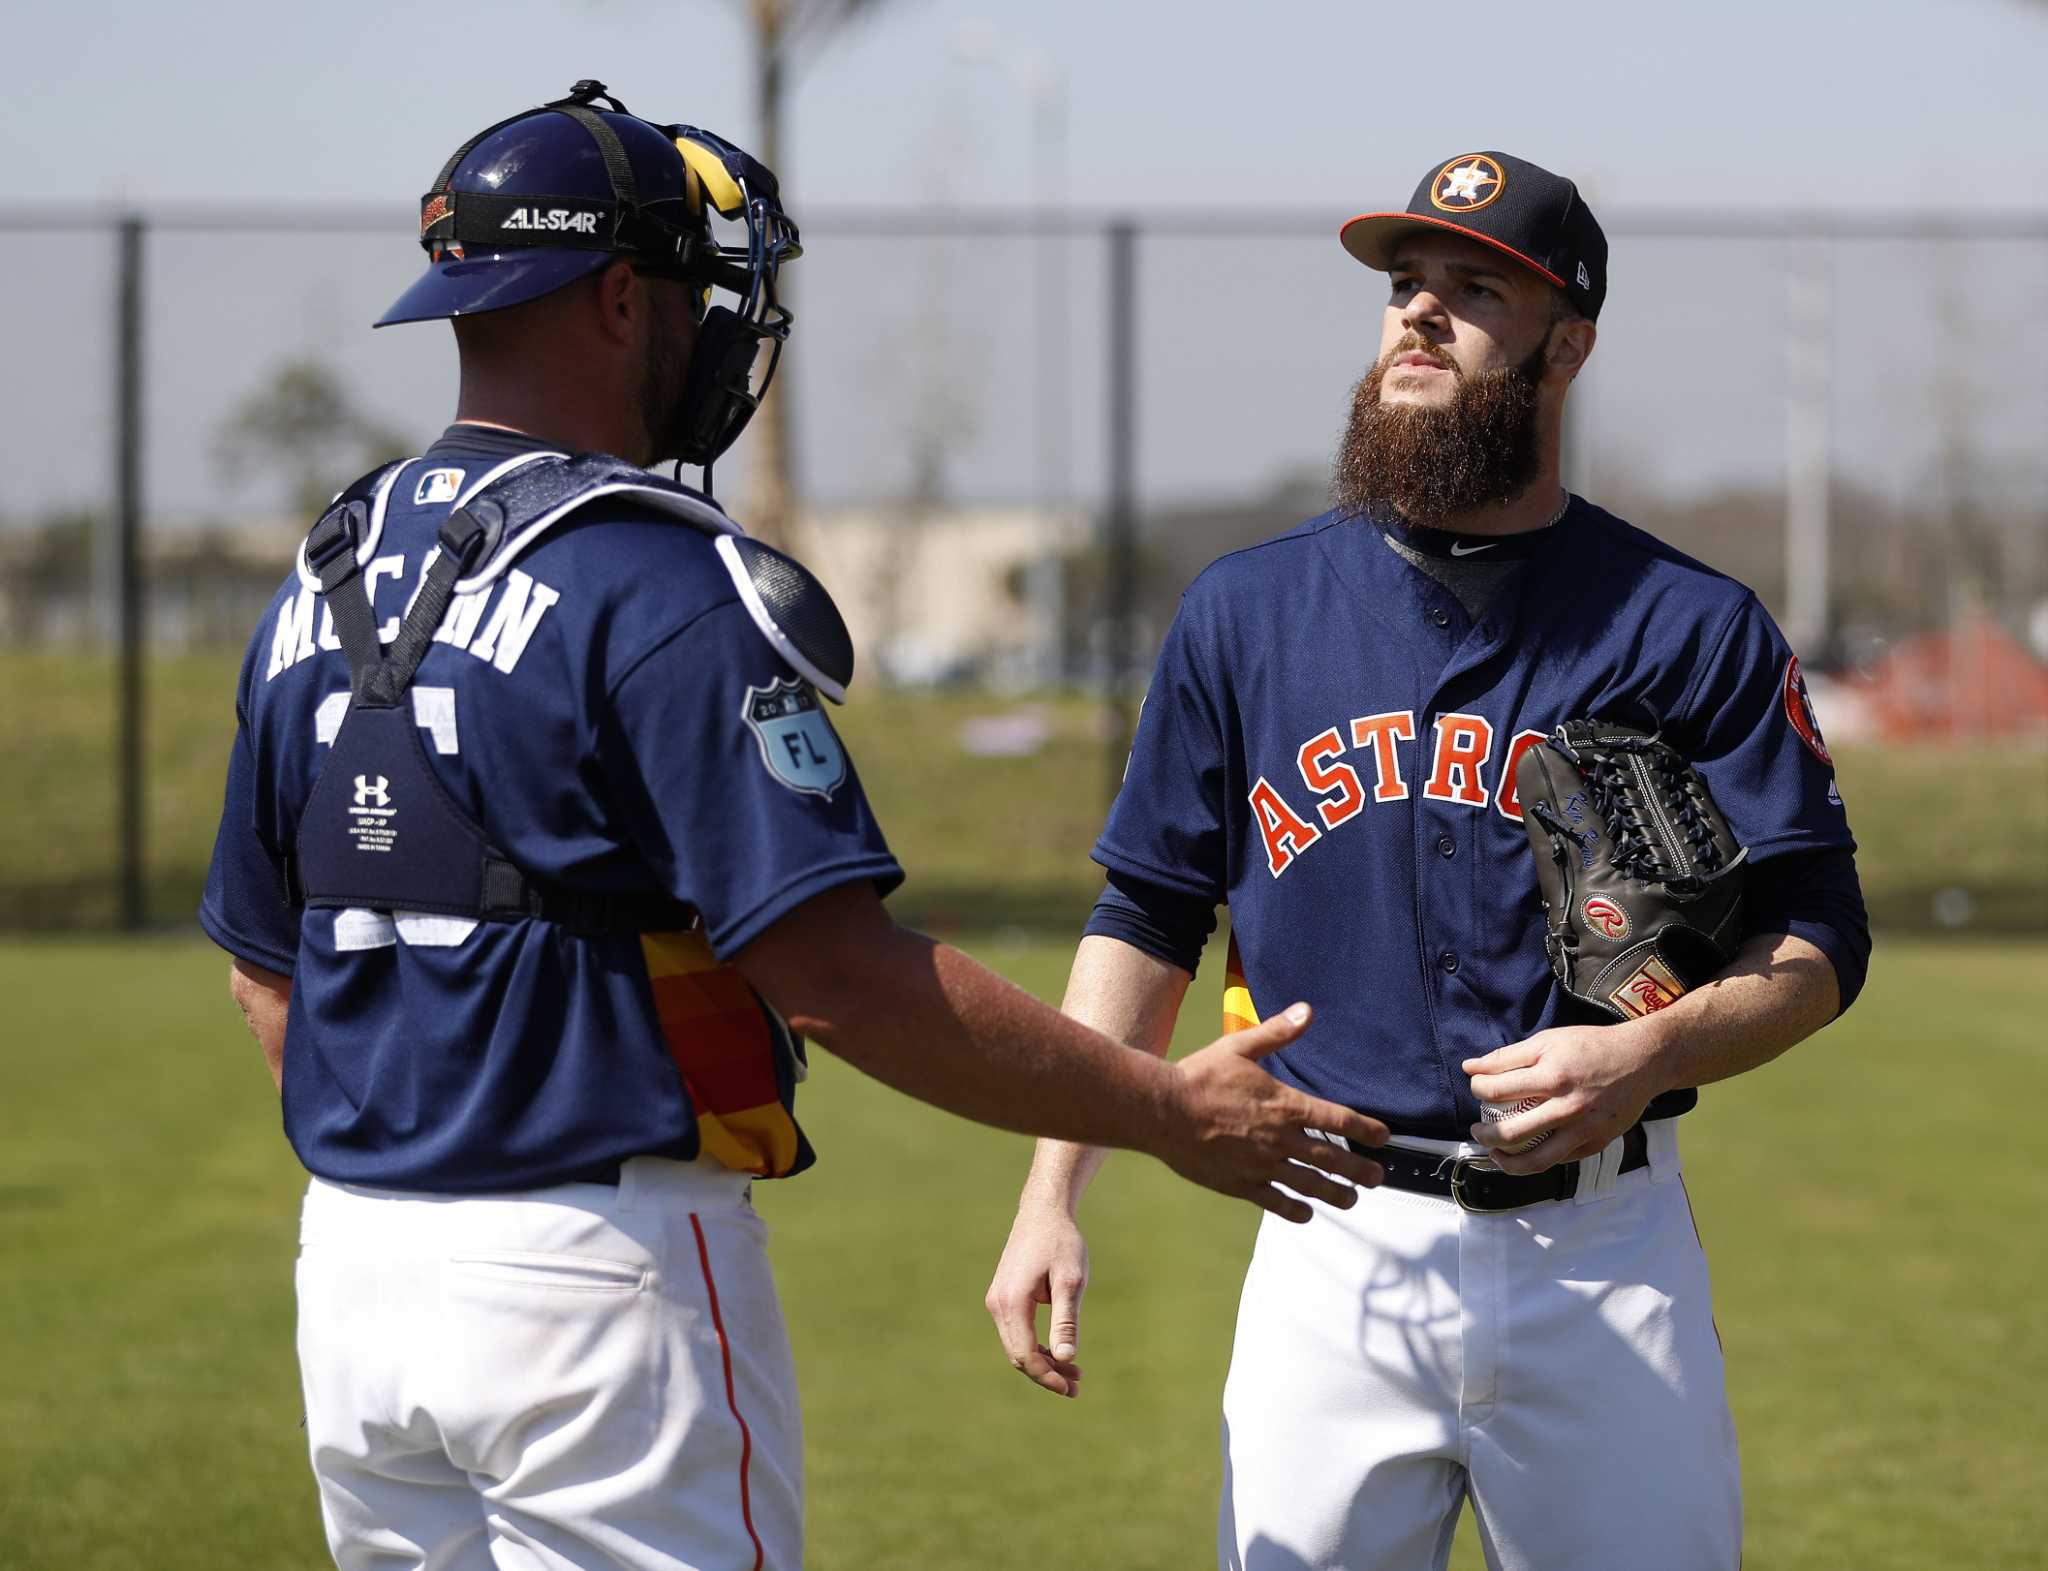 Catcher Brian McCann learning intricacies of Astros pitching staff